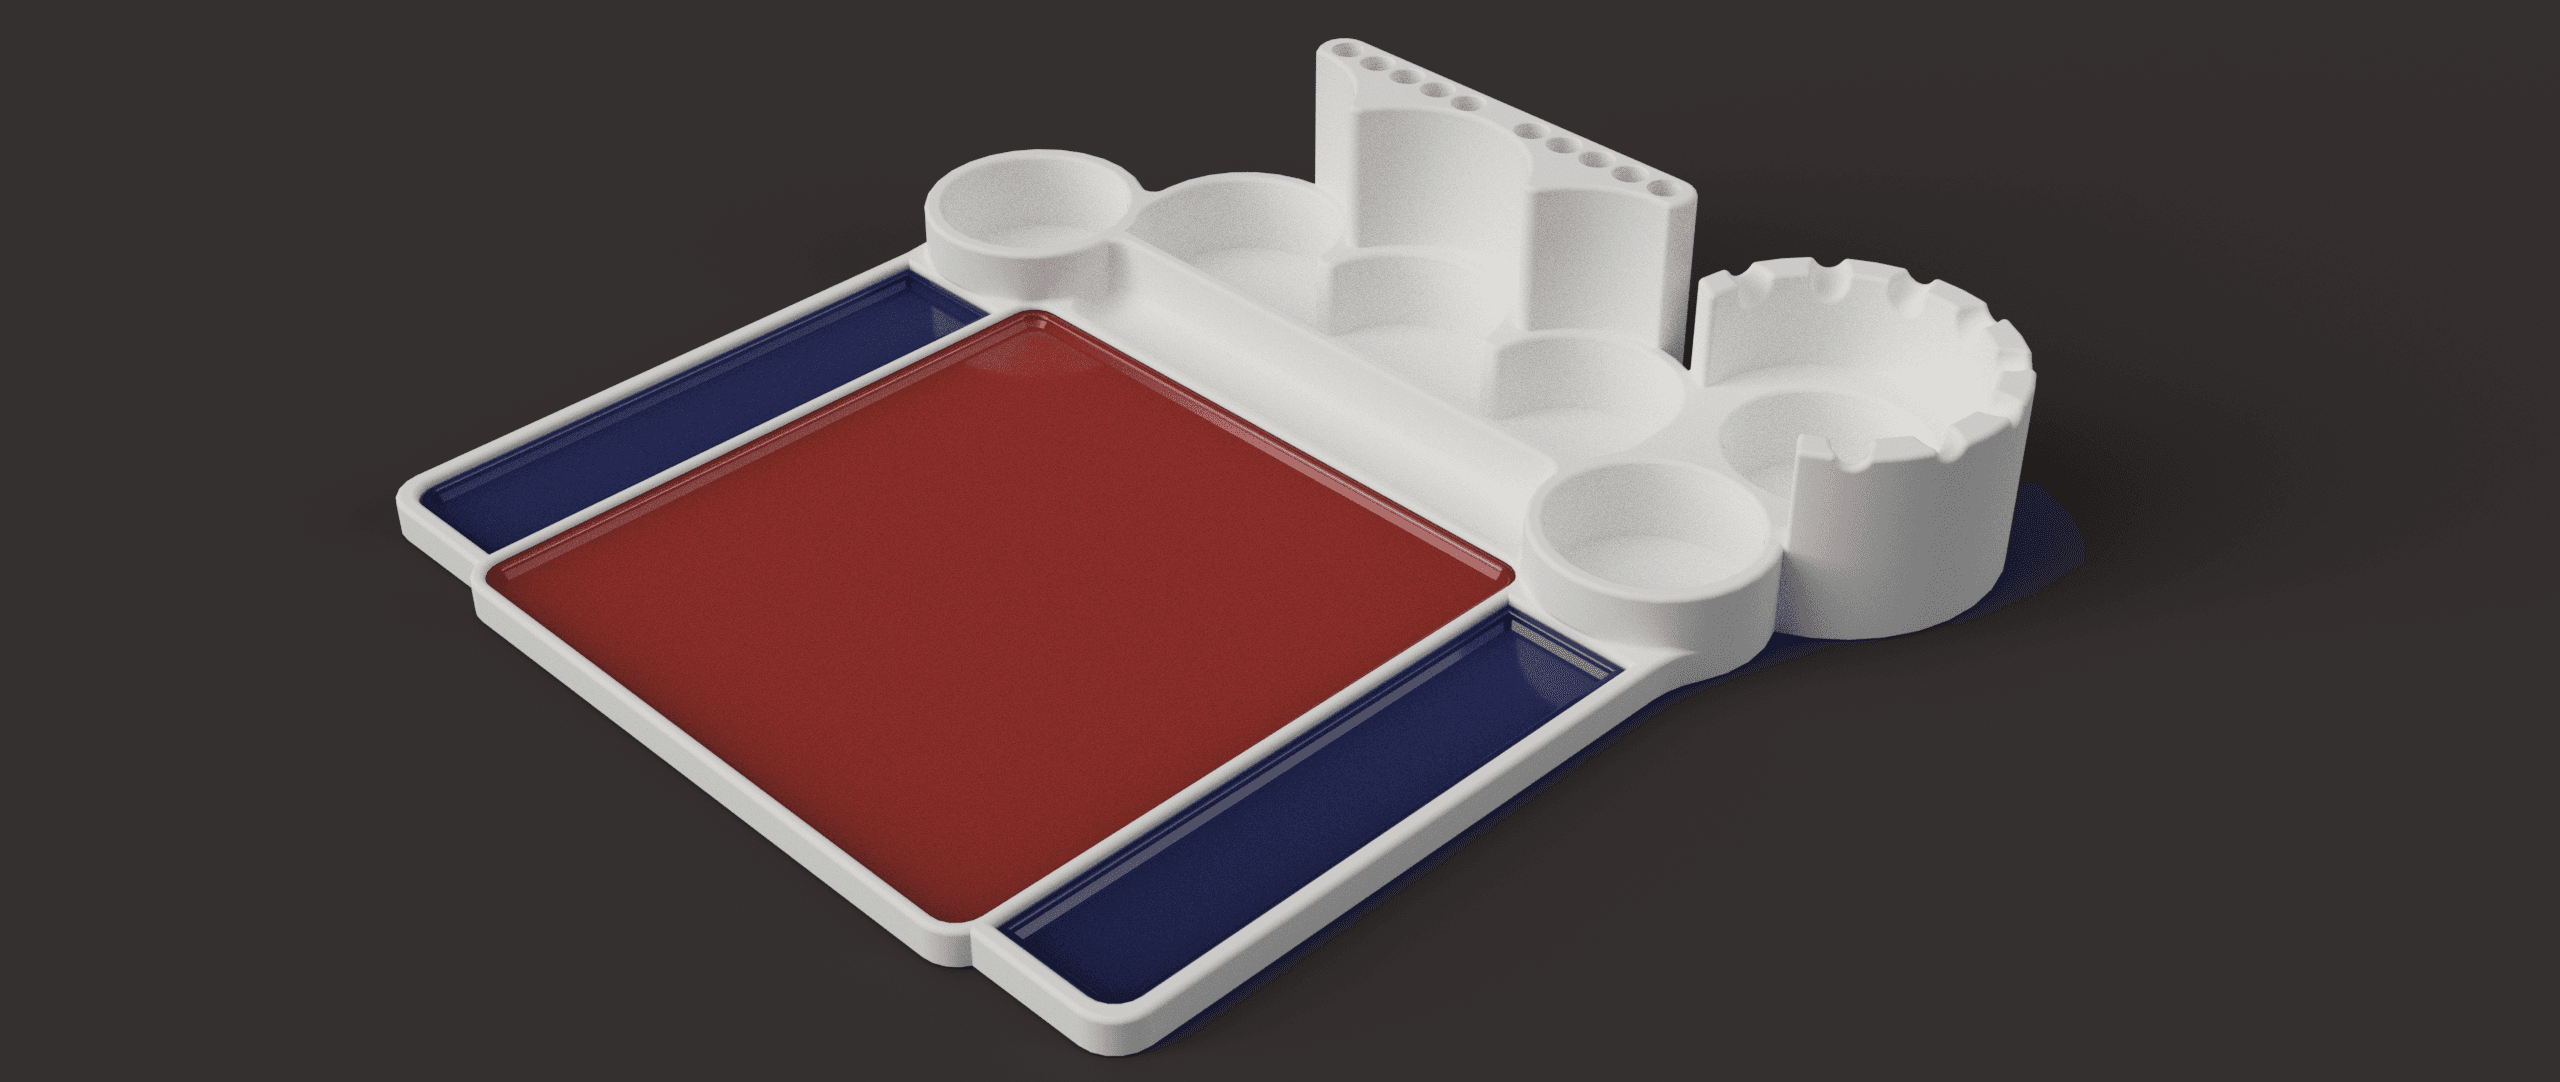 Painting Tray and Organizer 3d model